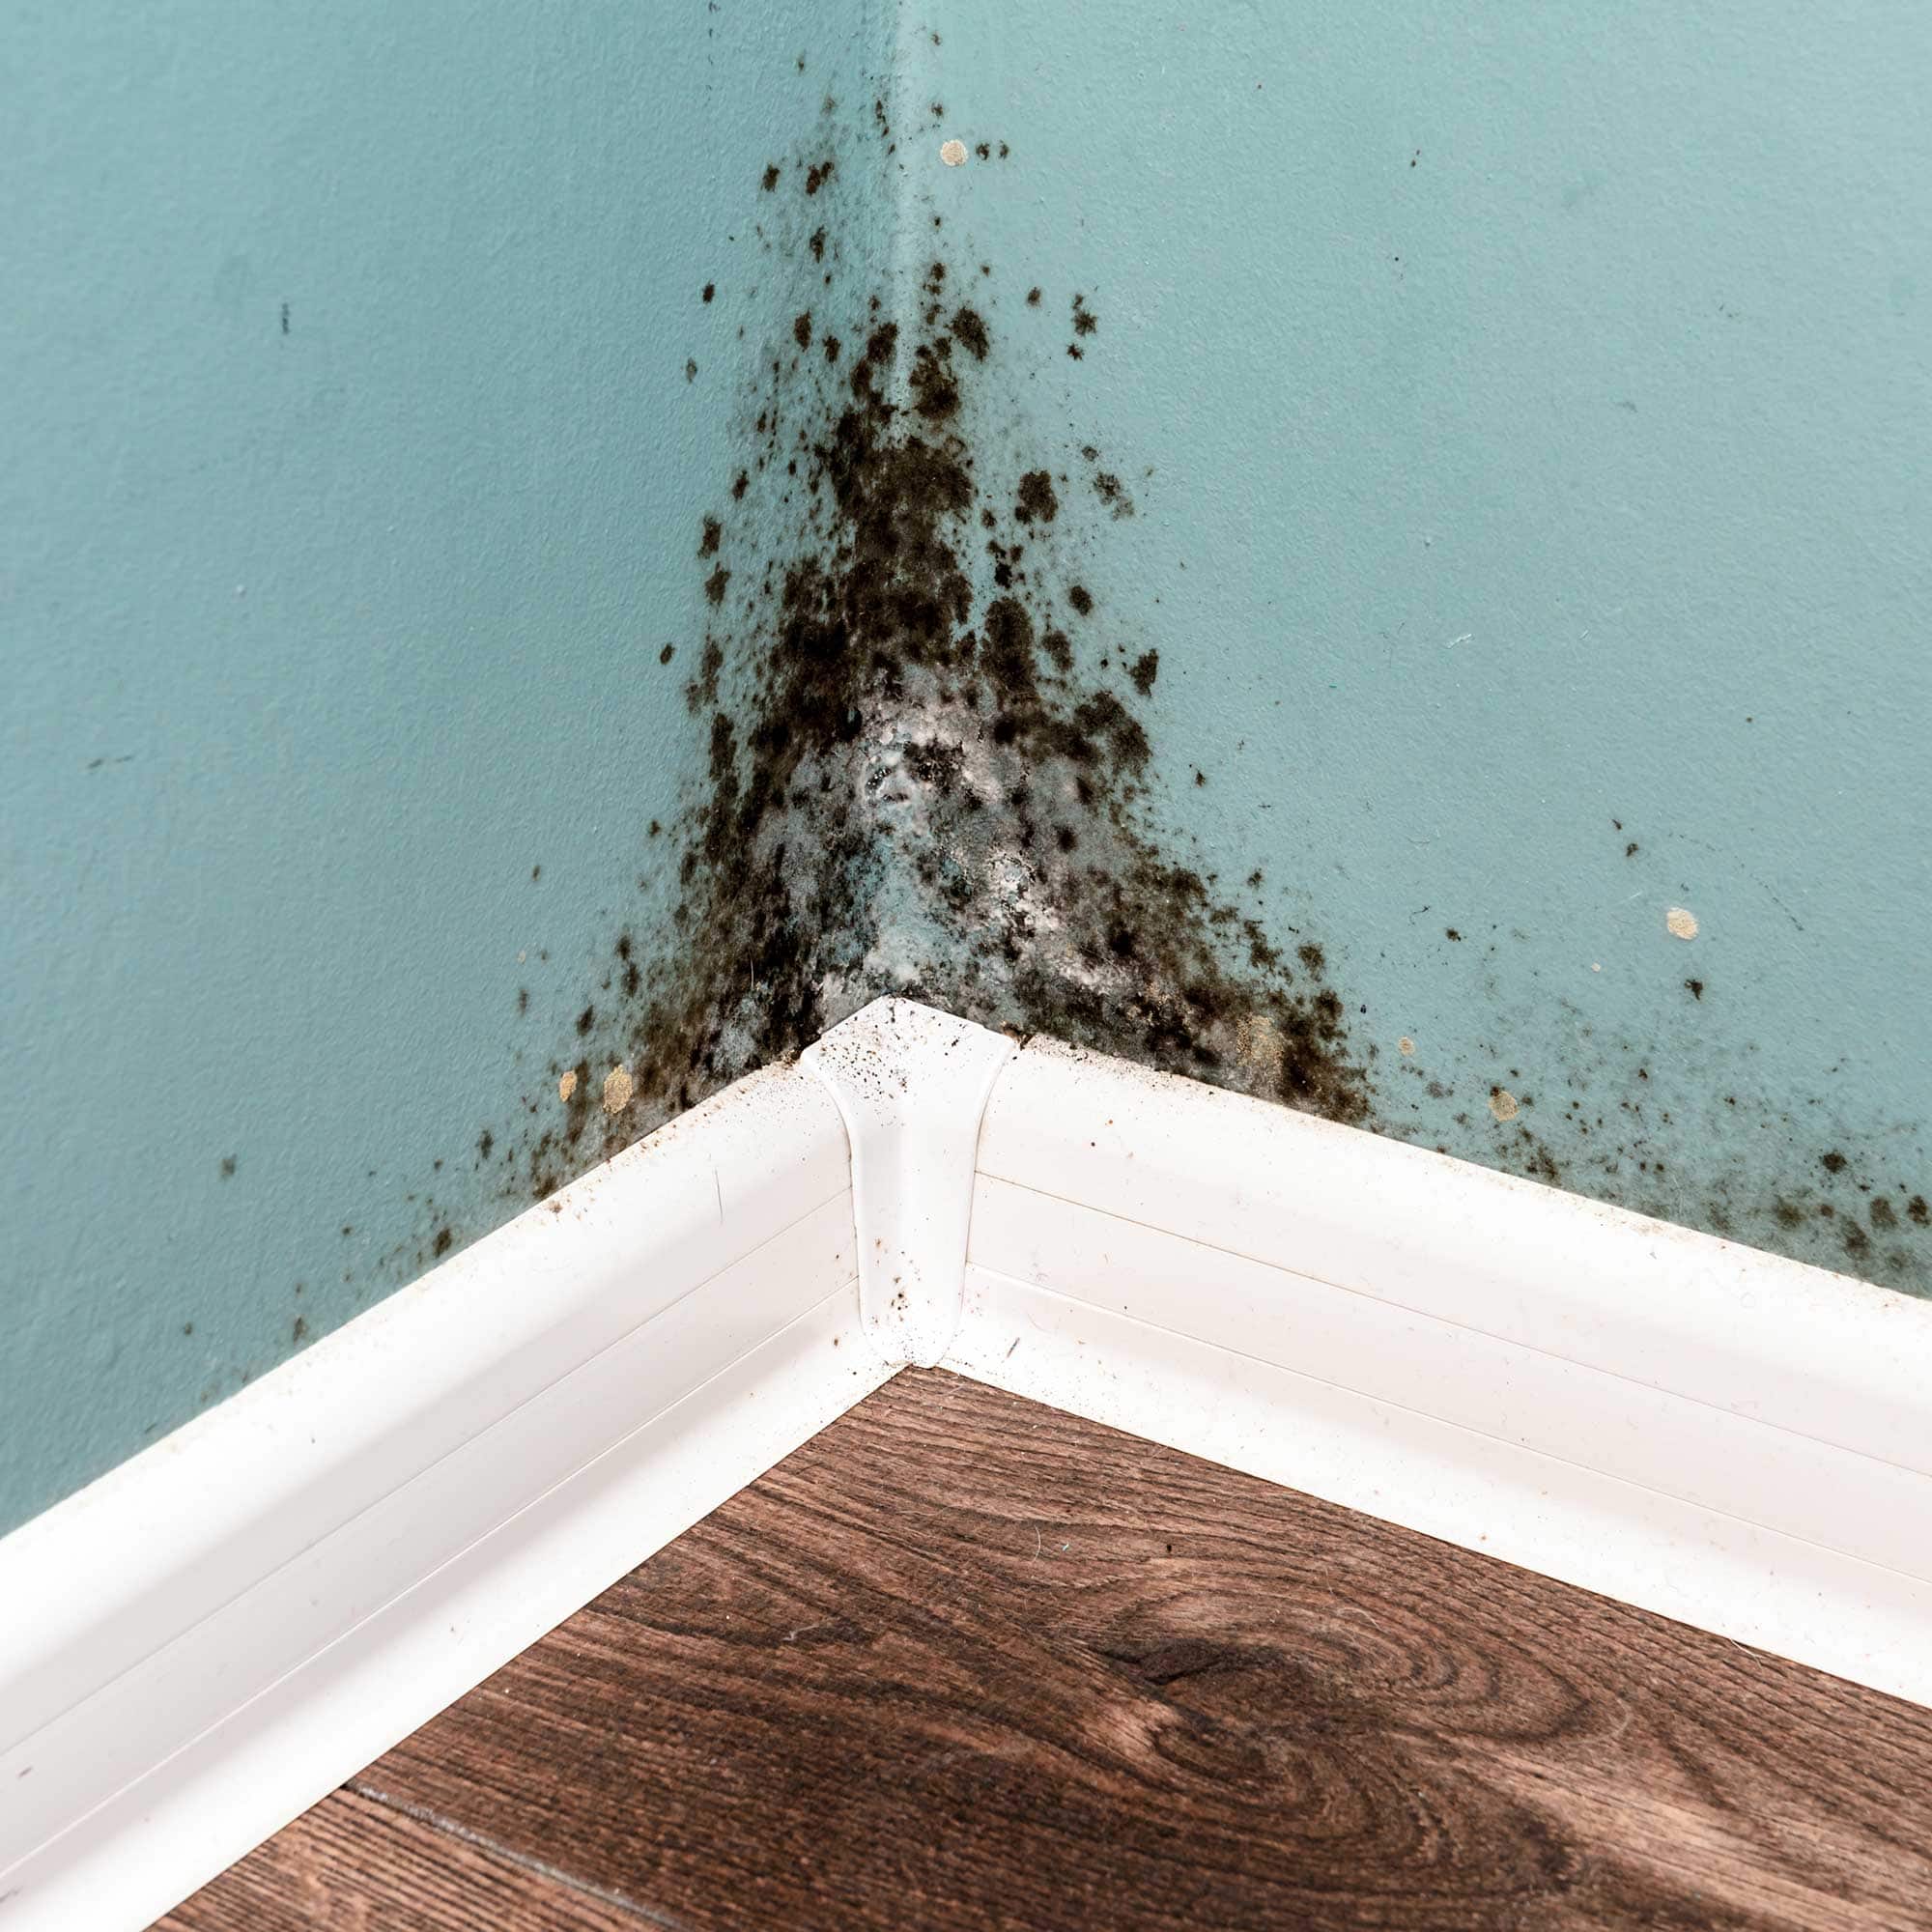 KnowHow: Work steps for mould remediation